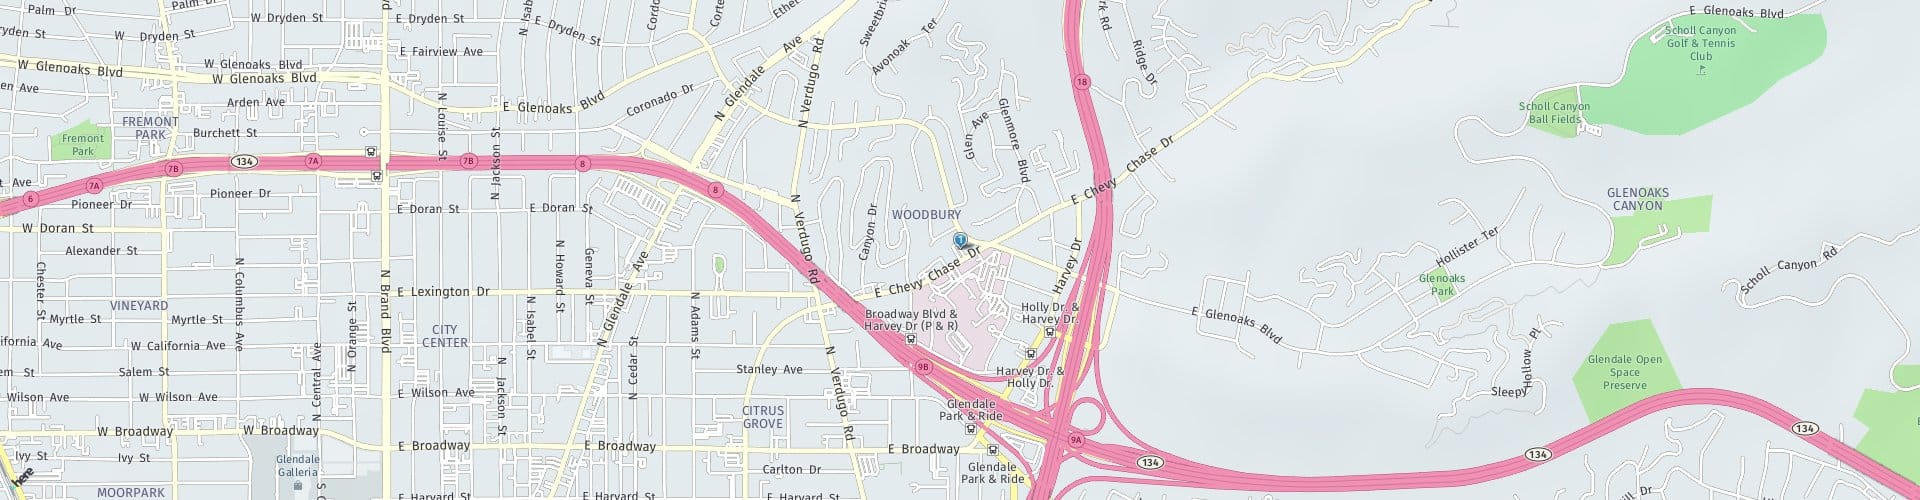 Location Map: 1577 East Chevy Chase Dr. Glendale, CA 91206